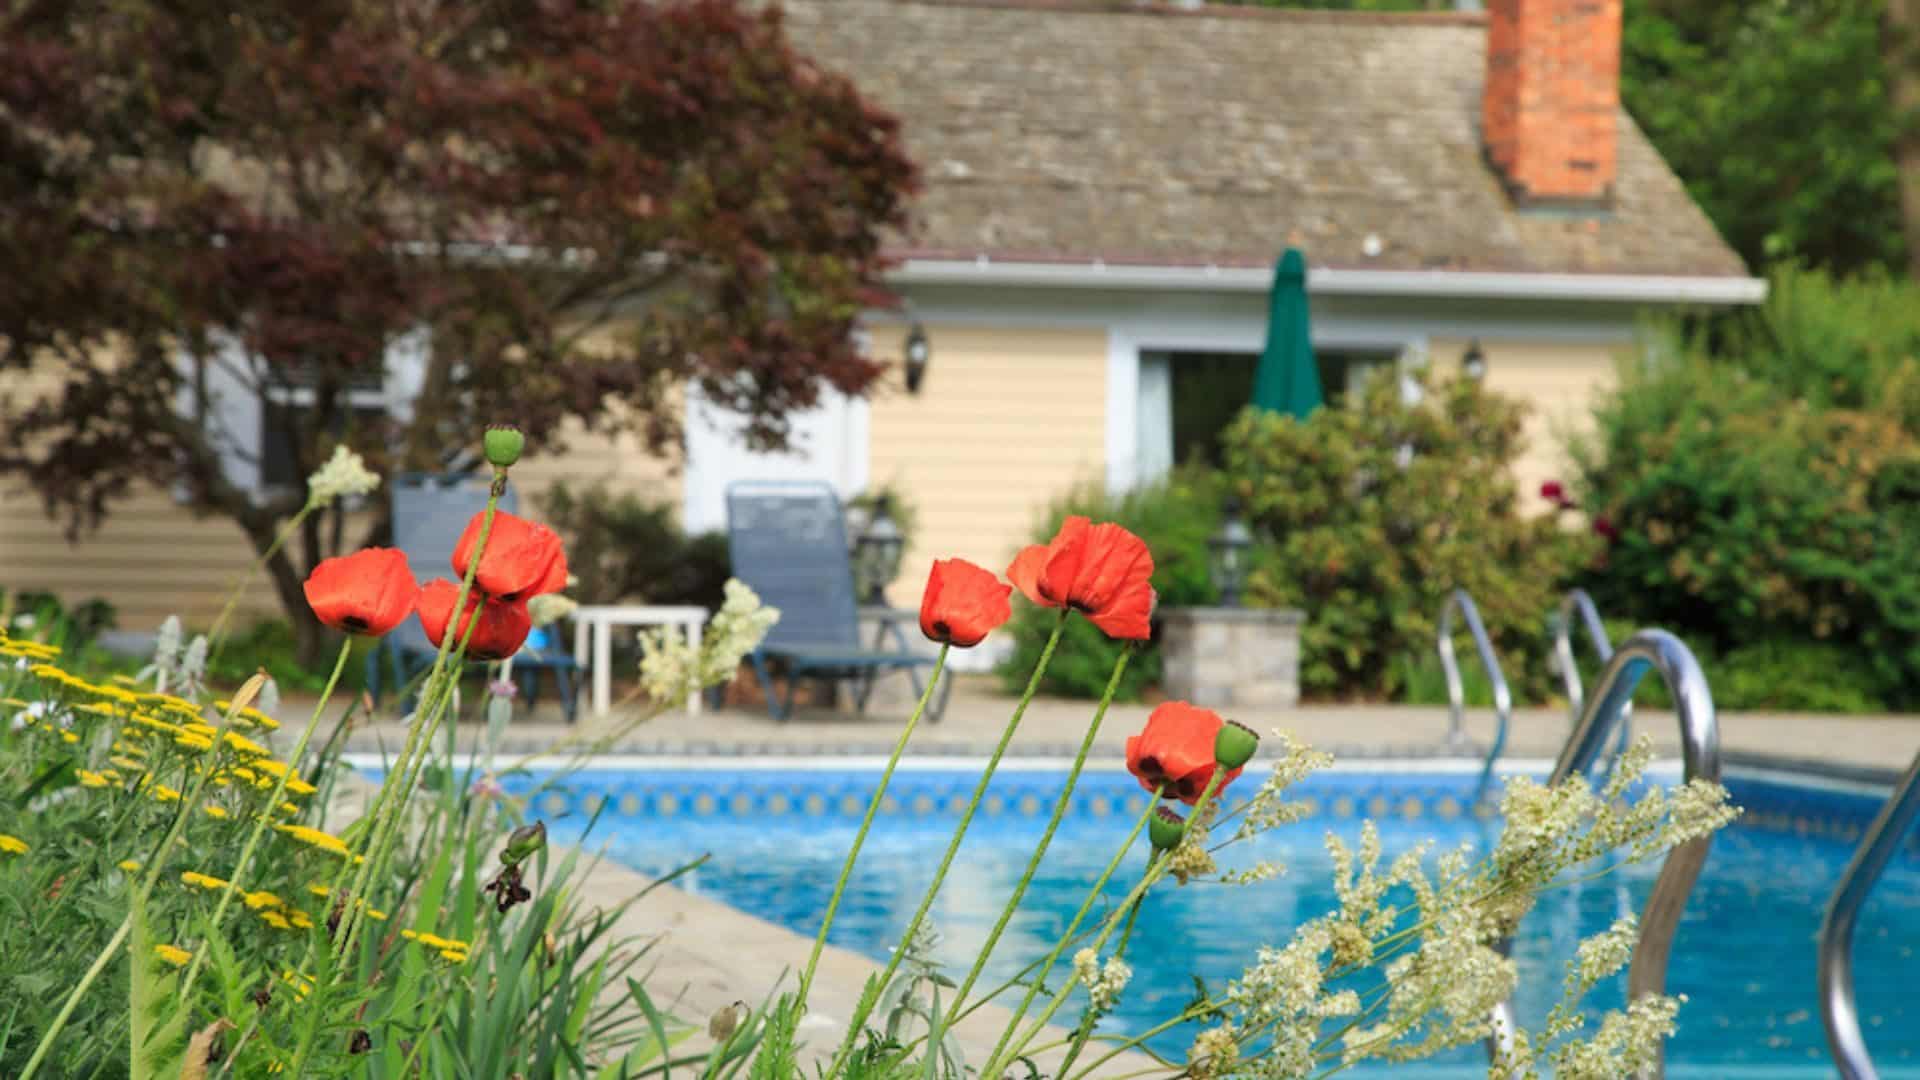 Poppies by the pool at the Devonfield Inn